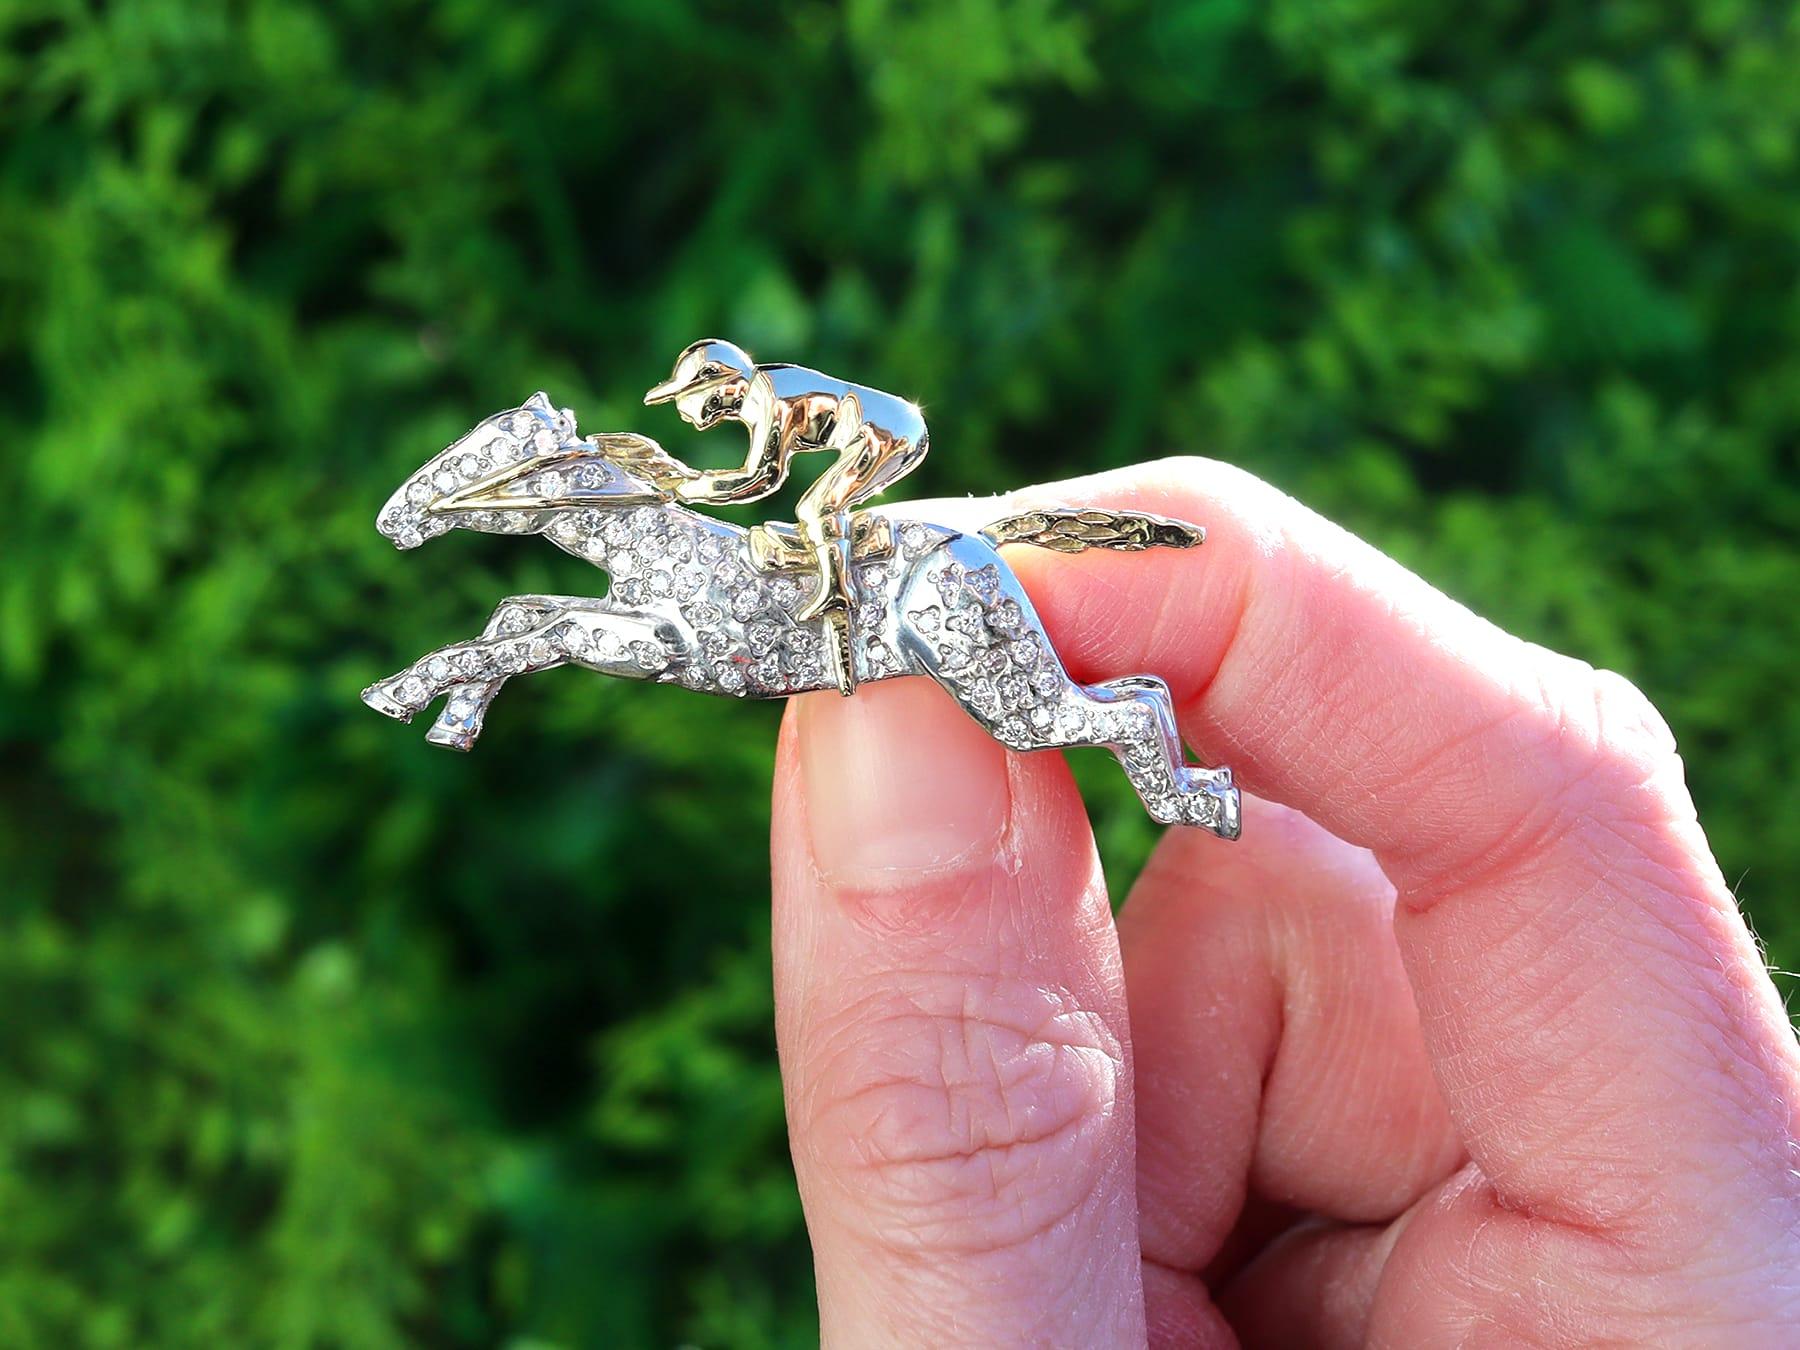 A fine and impressive vintage 0.82 carat diamond, 18 karat yellow and white gold horse and jockey brooch; part of our diverse antique jewellery collections

This fine and impressive vintage diamond brooch has been crafted in 18k yellow and white